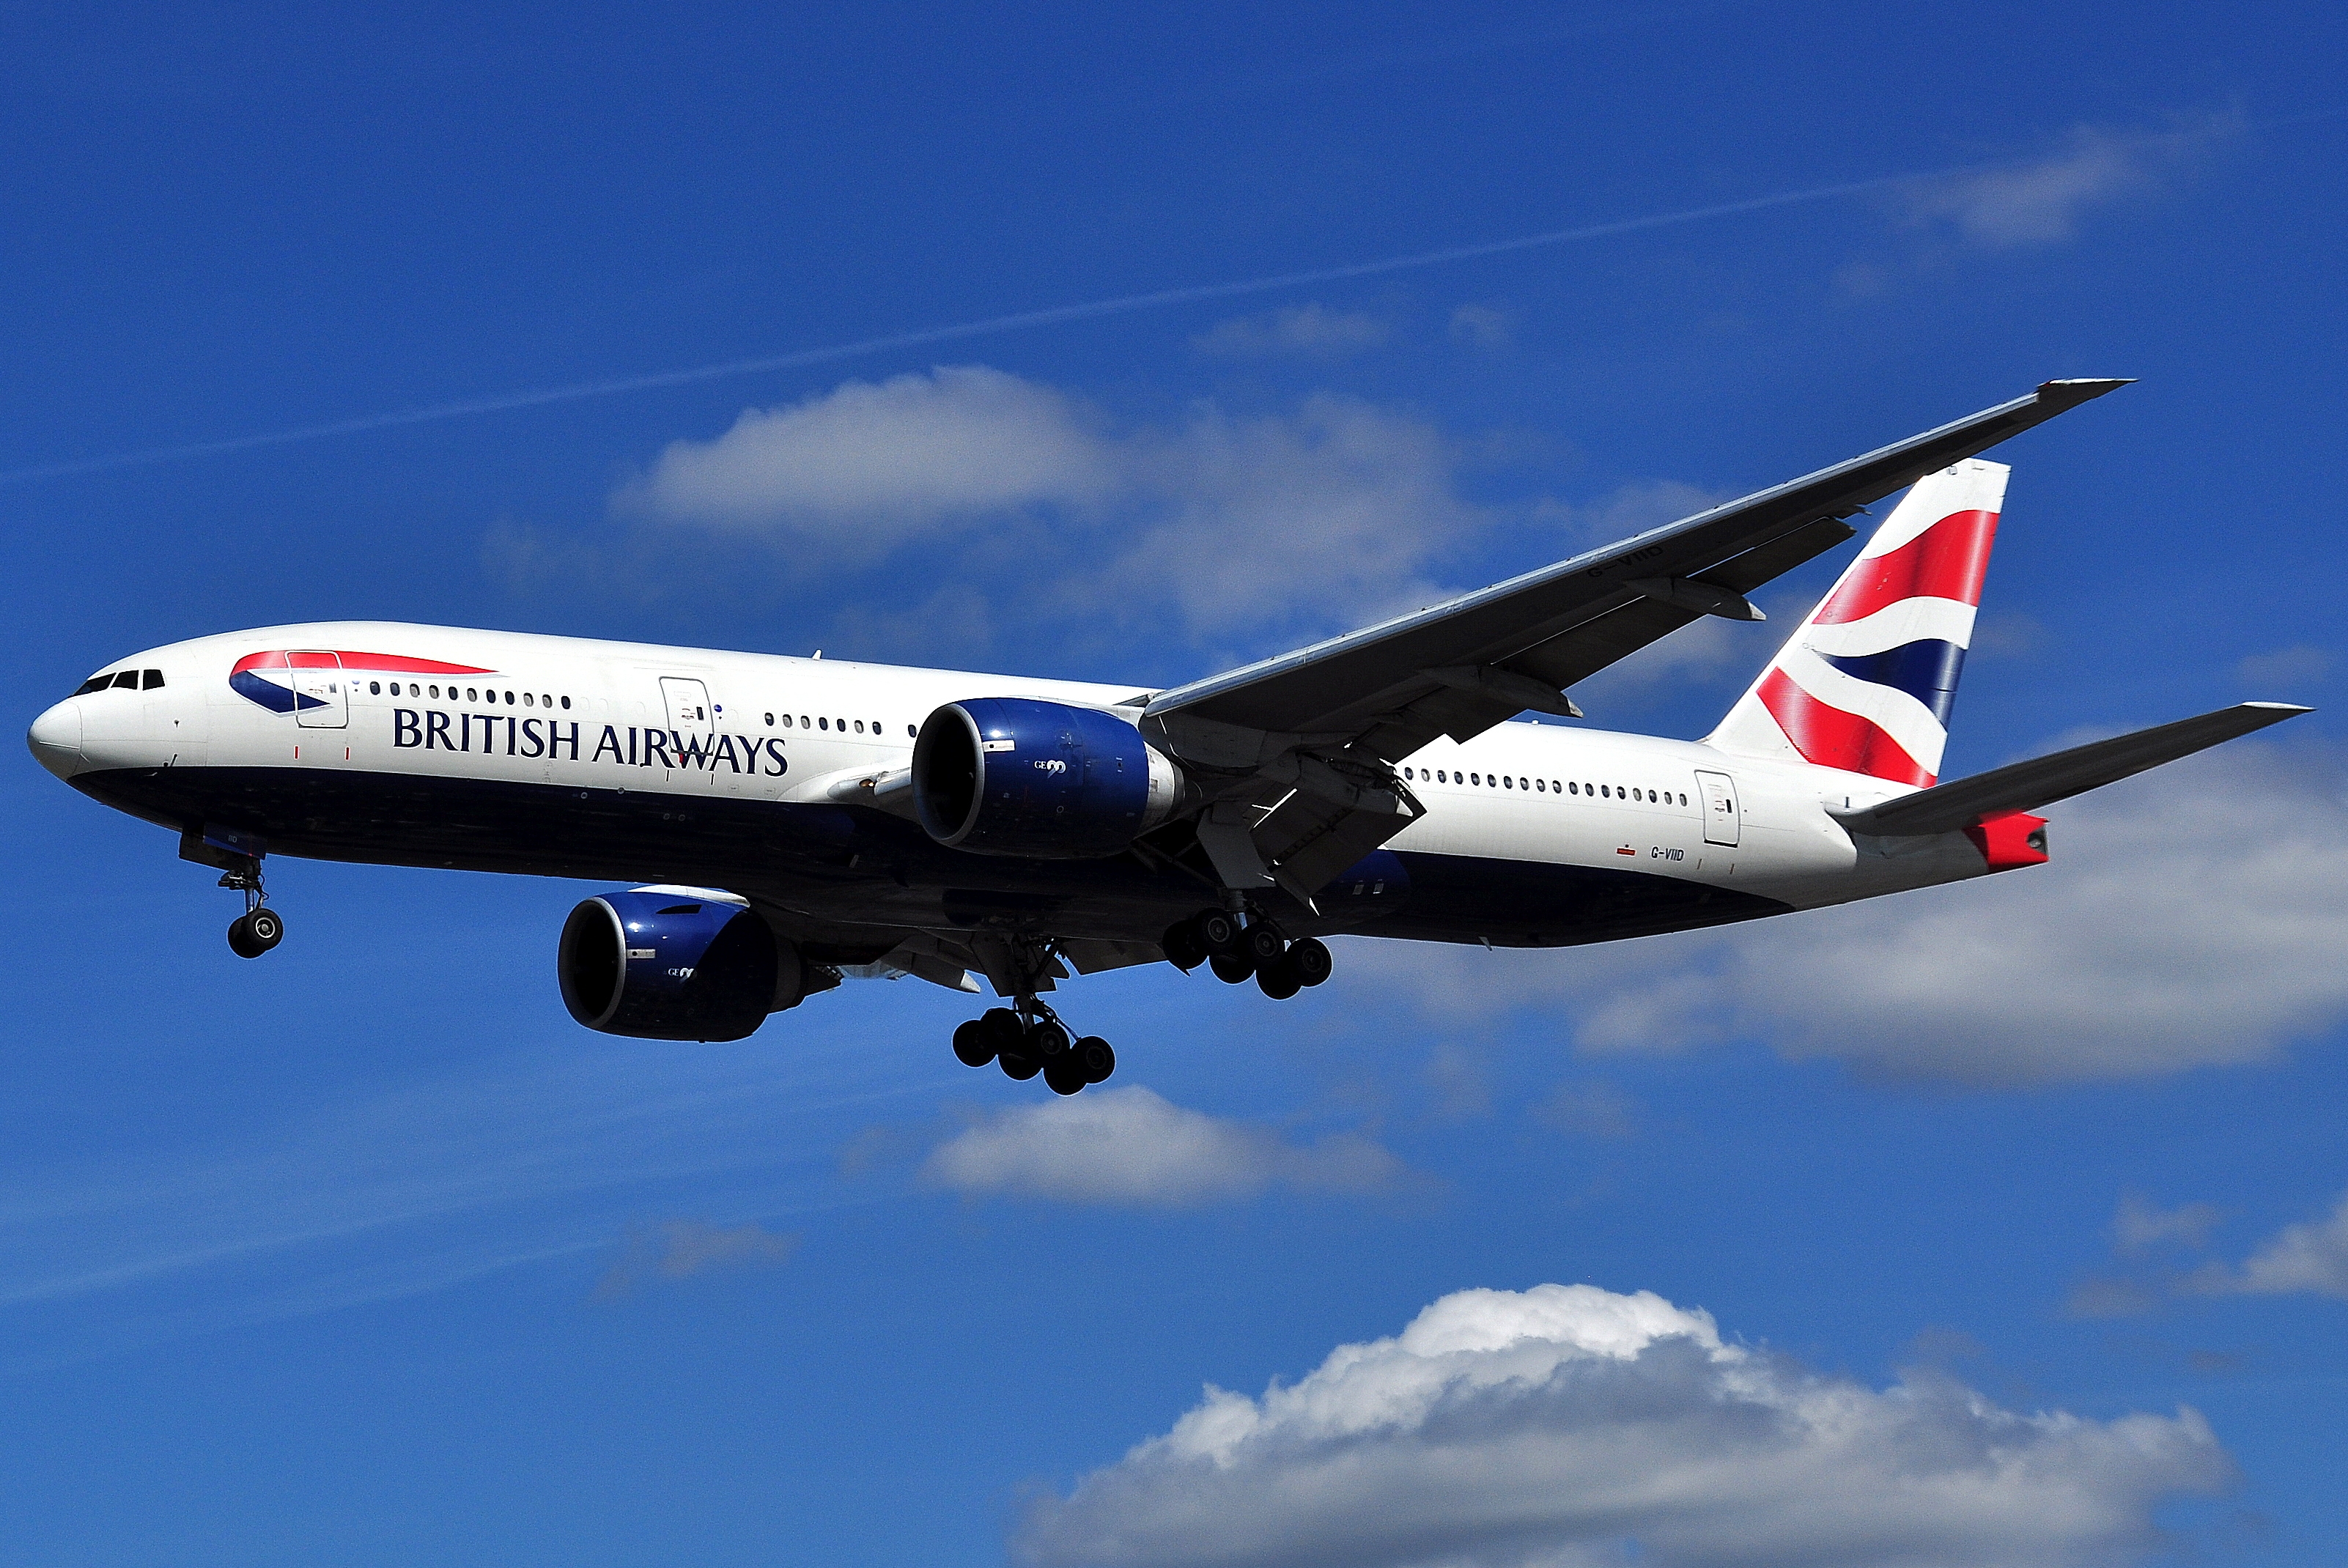 British Airways just audited my account and removed my Avios